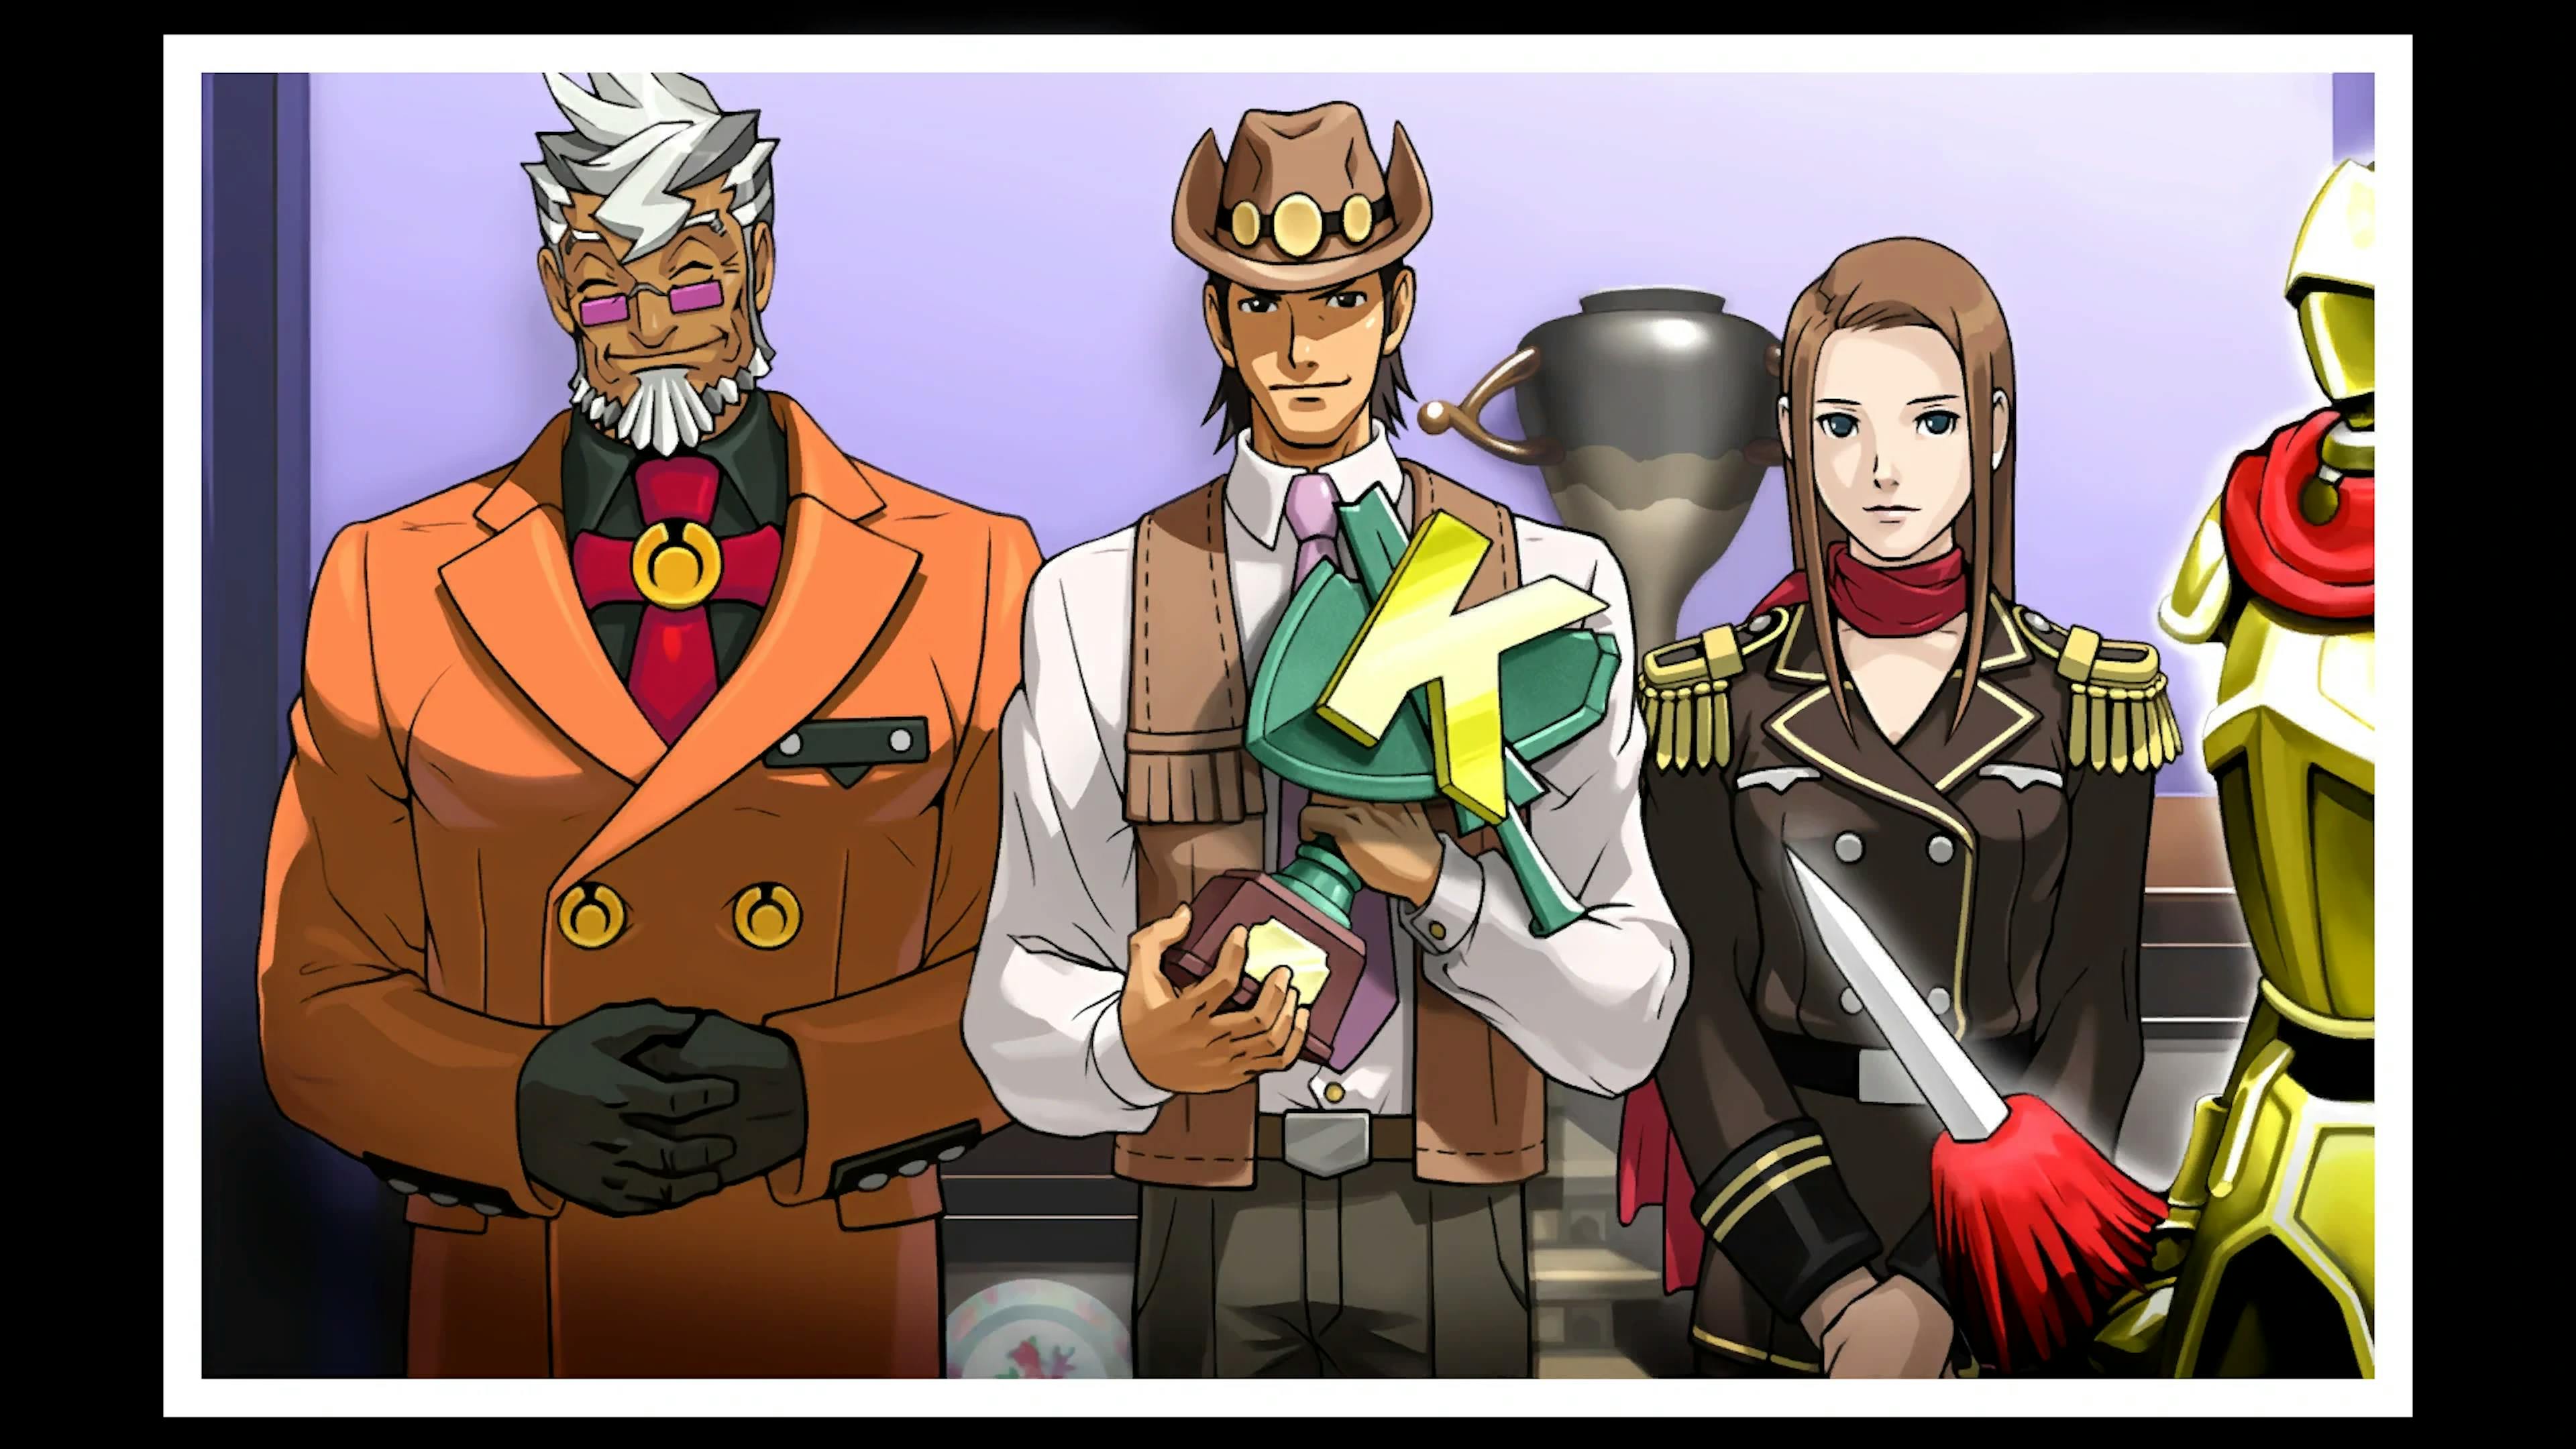 Source: https://aceattorney.fandom.com/wiki/Rise_from_the_Ashes